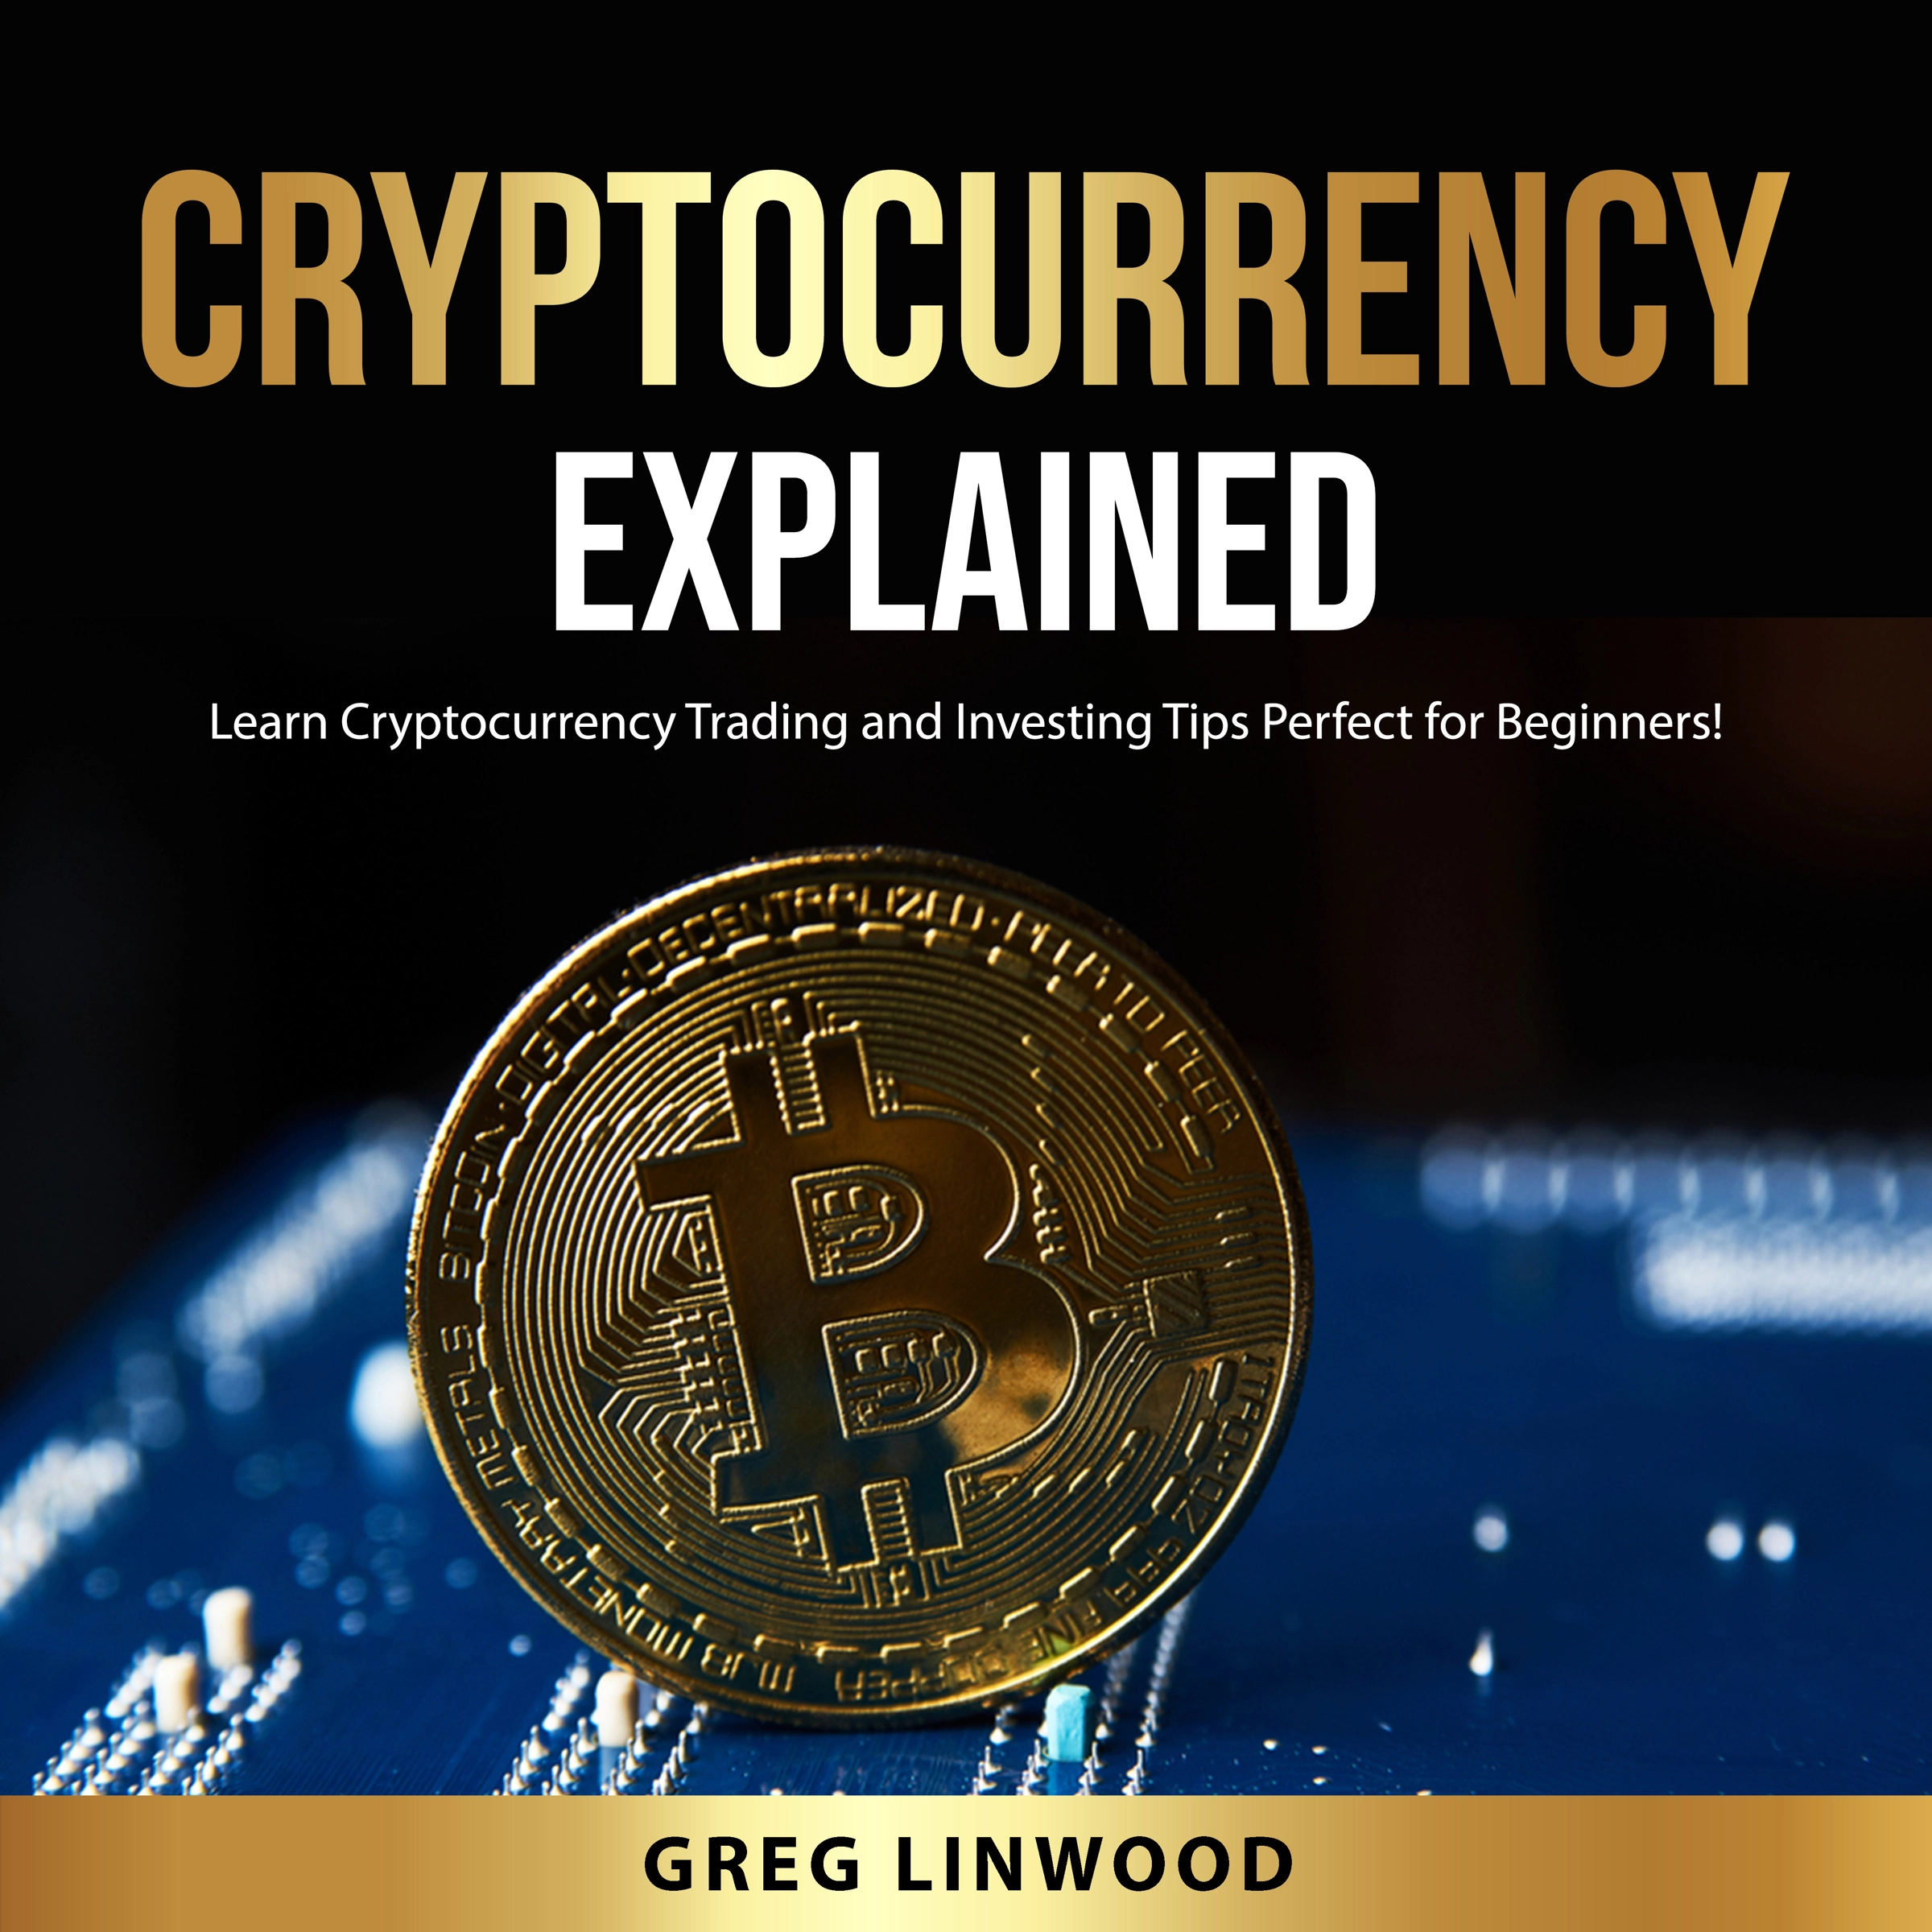 Cryptocurrency Explained by Greg Linwood Audiobook